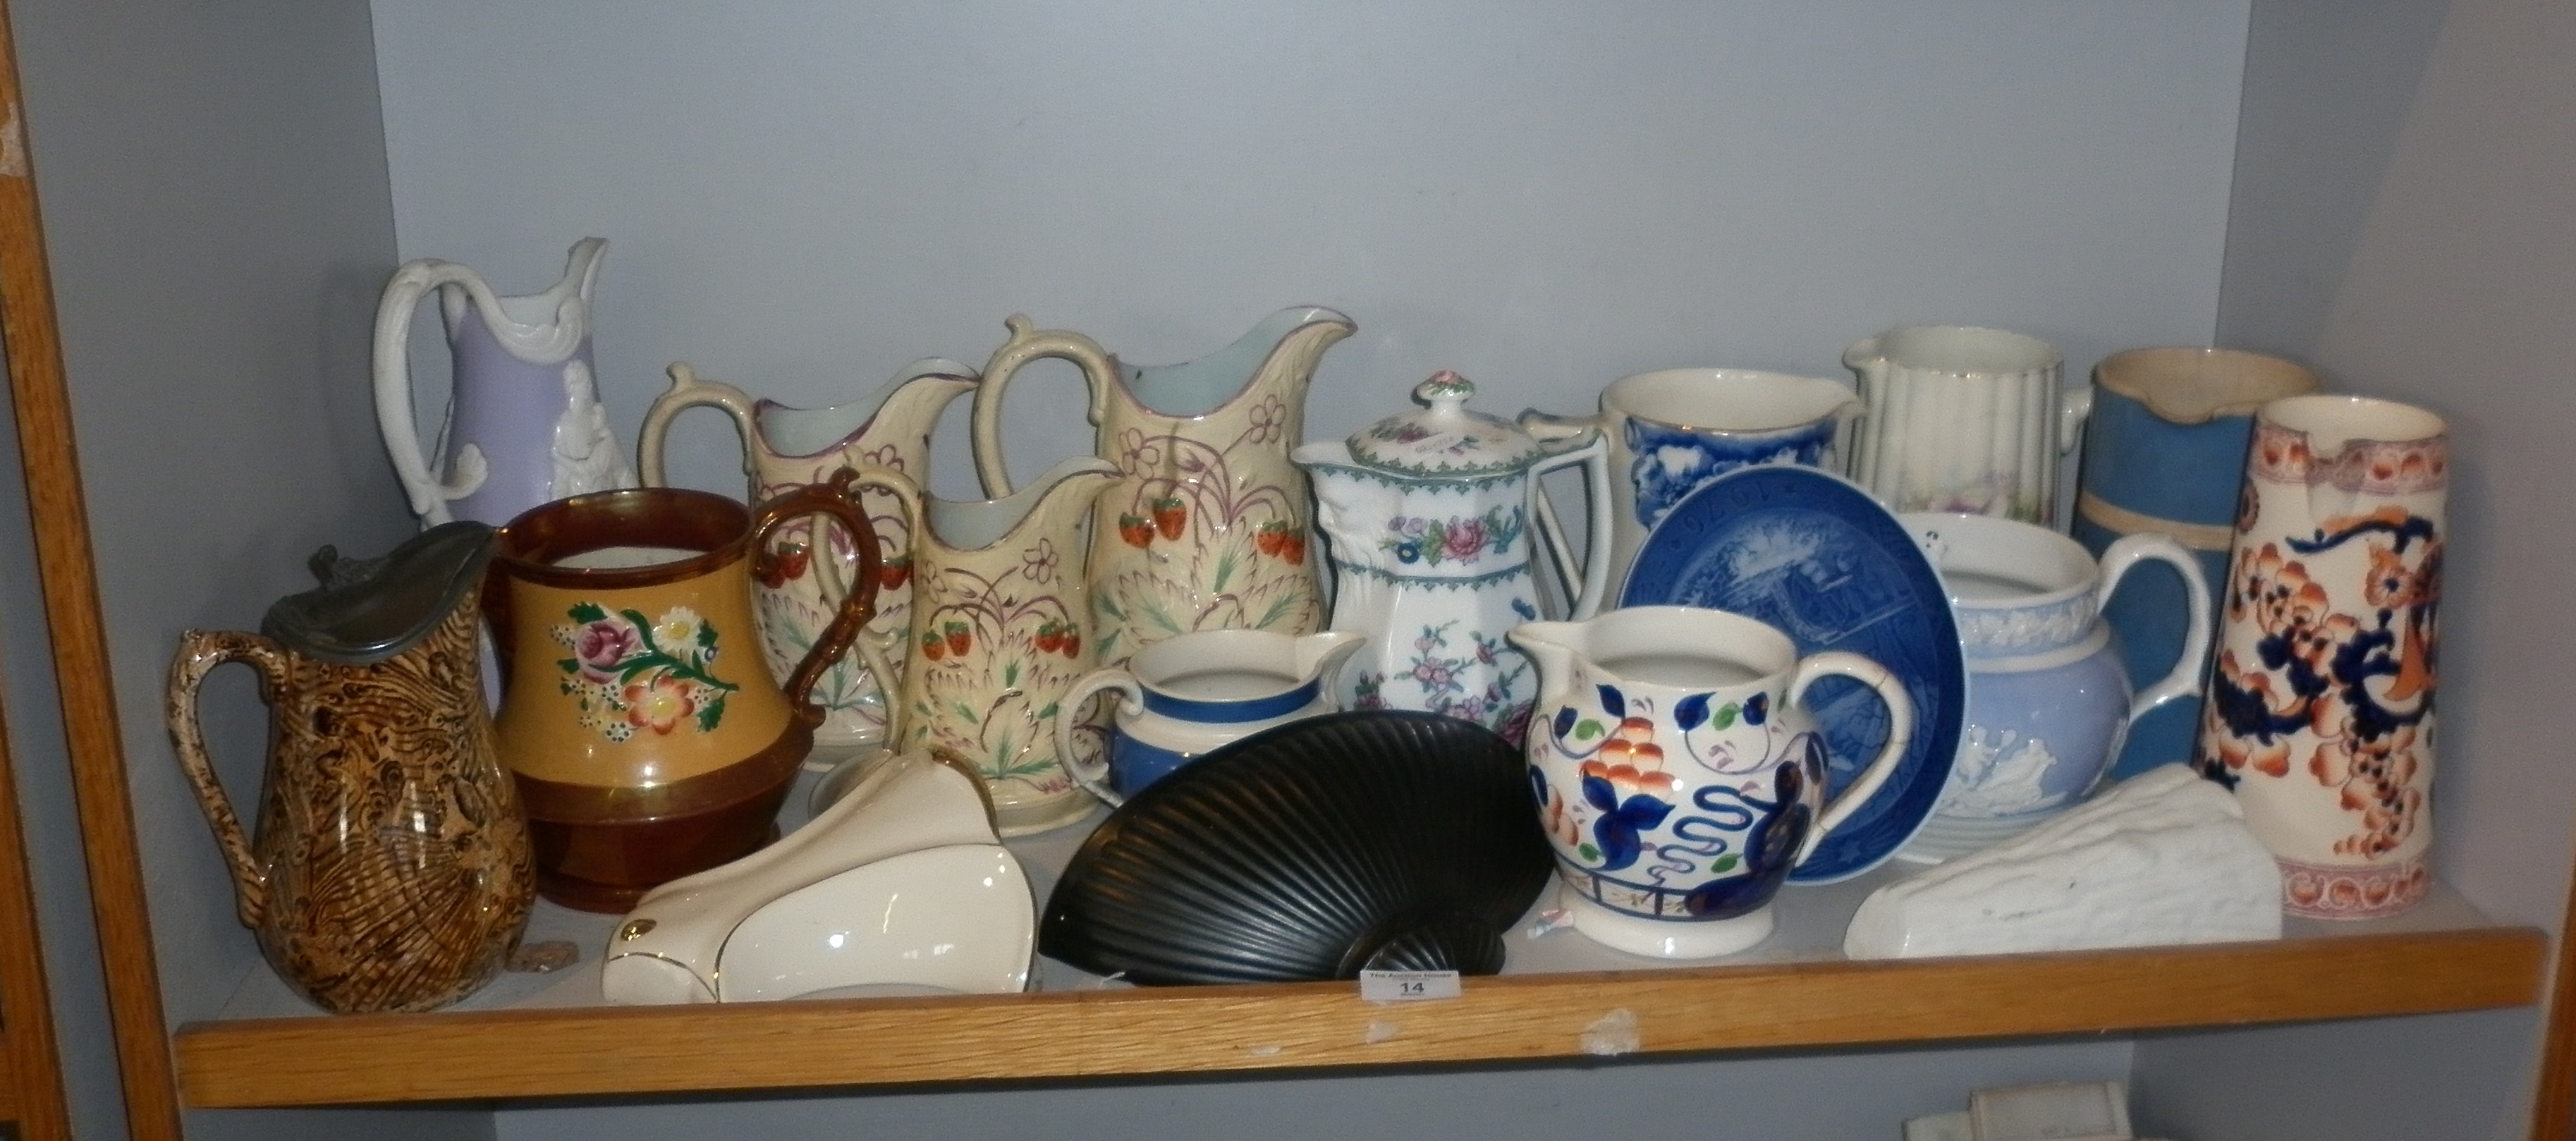 Assorted china and pottery jugs